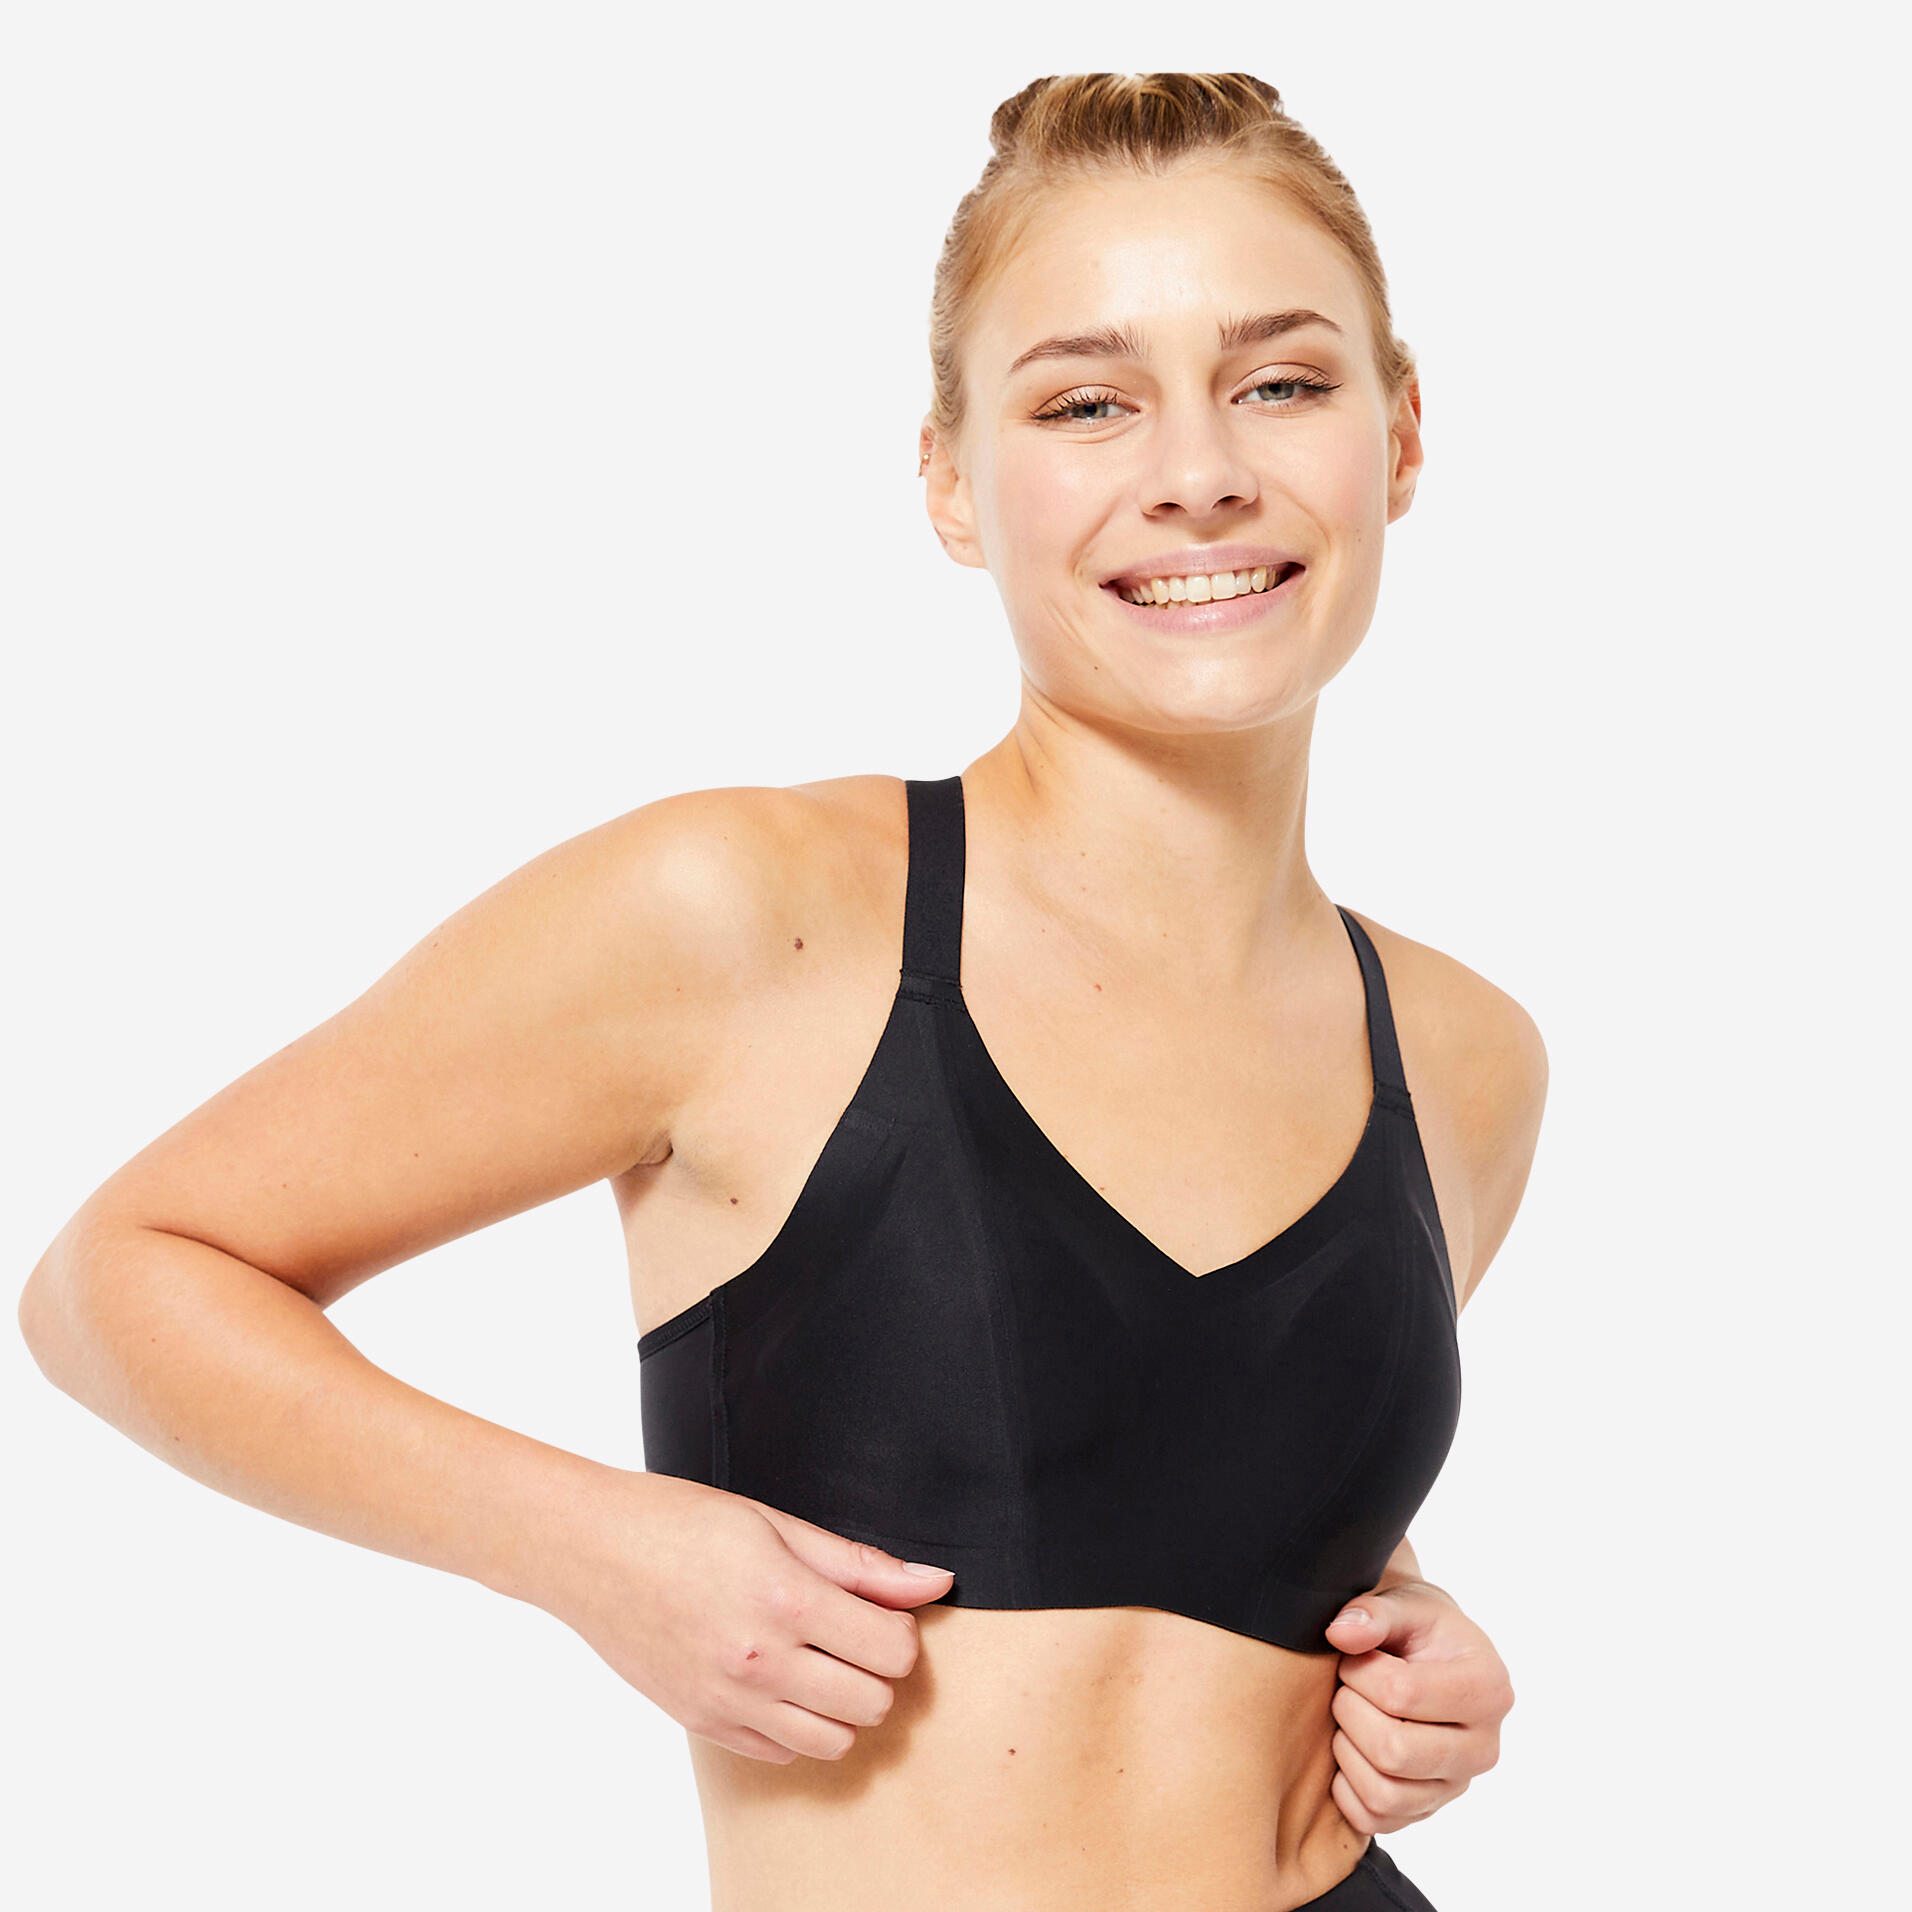 Women's invisible sports bra with high-support cups - Black KALENJI